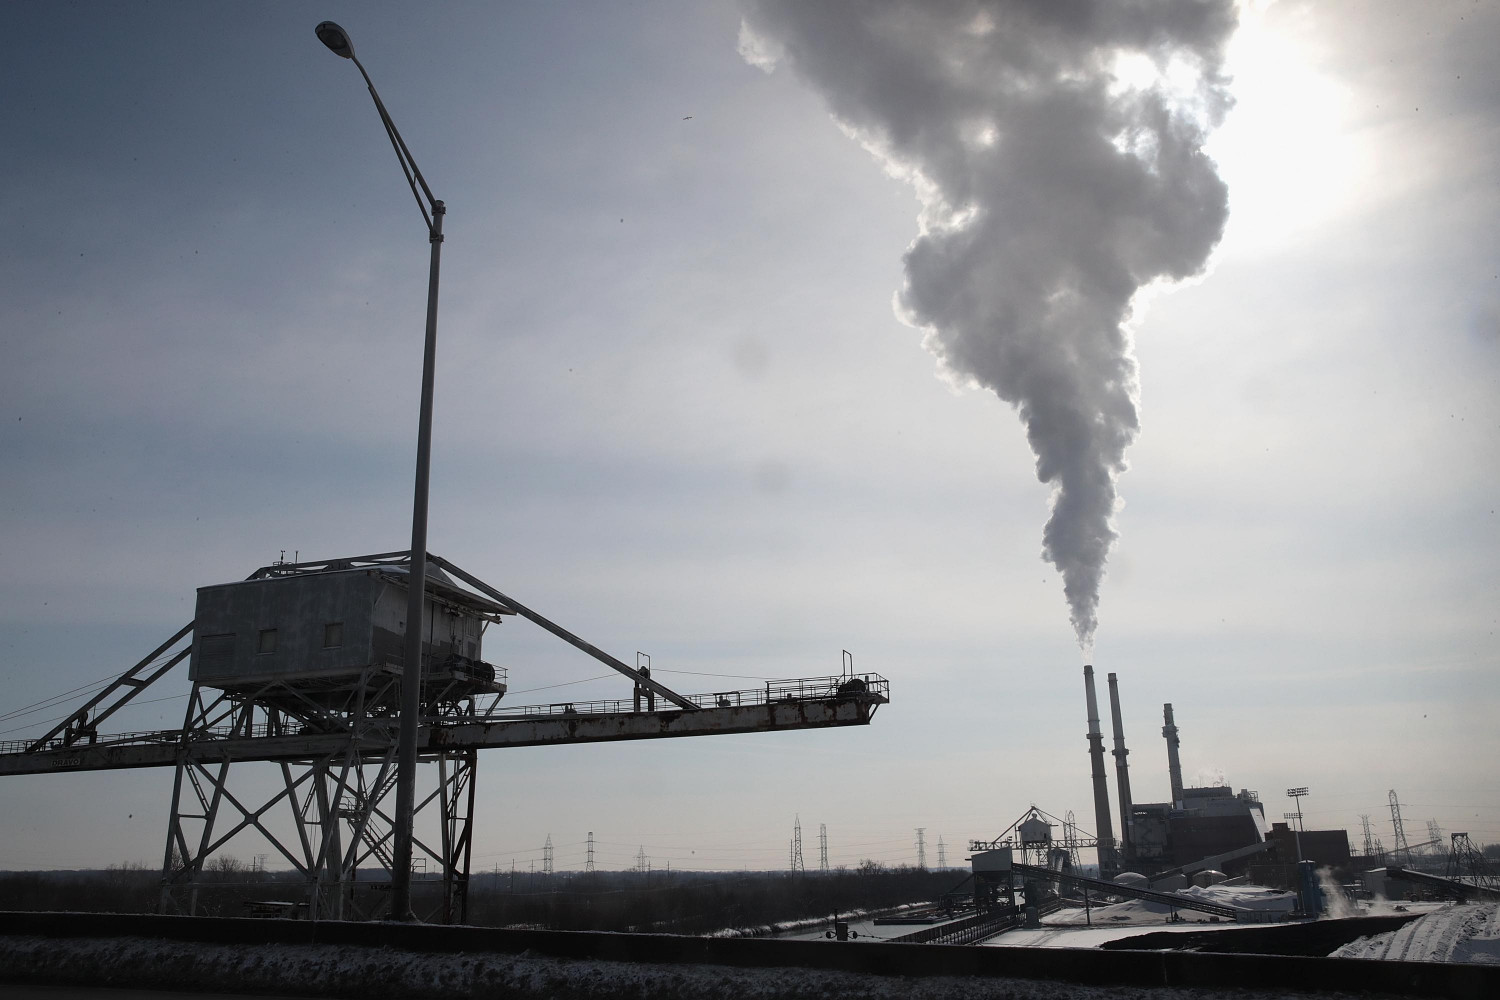 Smoke rises from a coal-fired power plant on Feb. 1, 2019 in Romeoville, Illinois.  (Scott Olson/Getty Images)